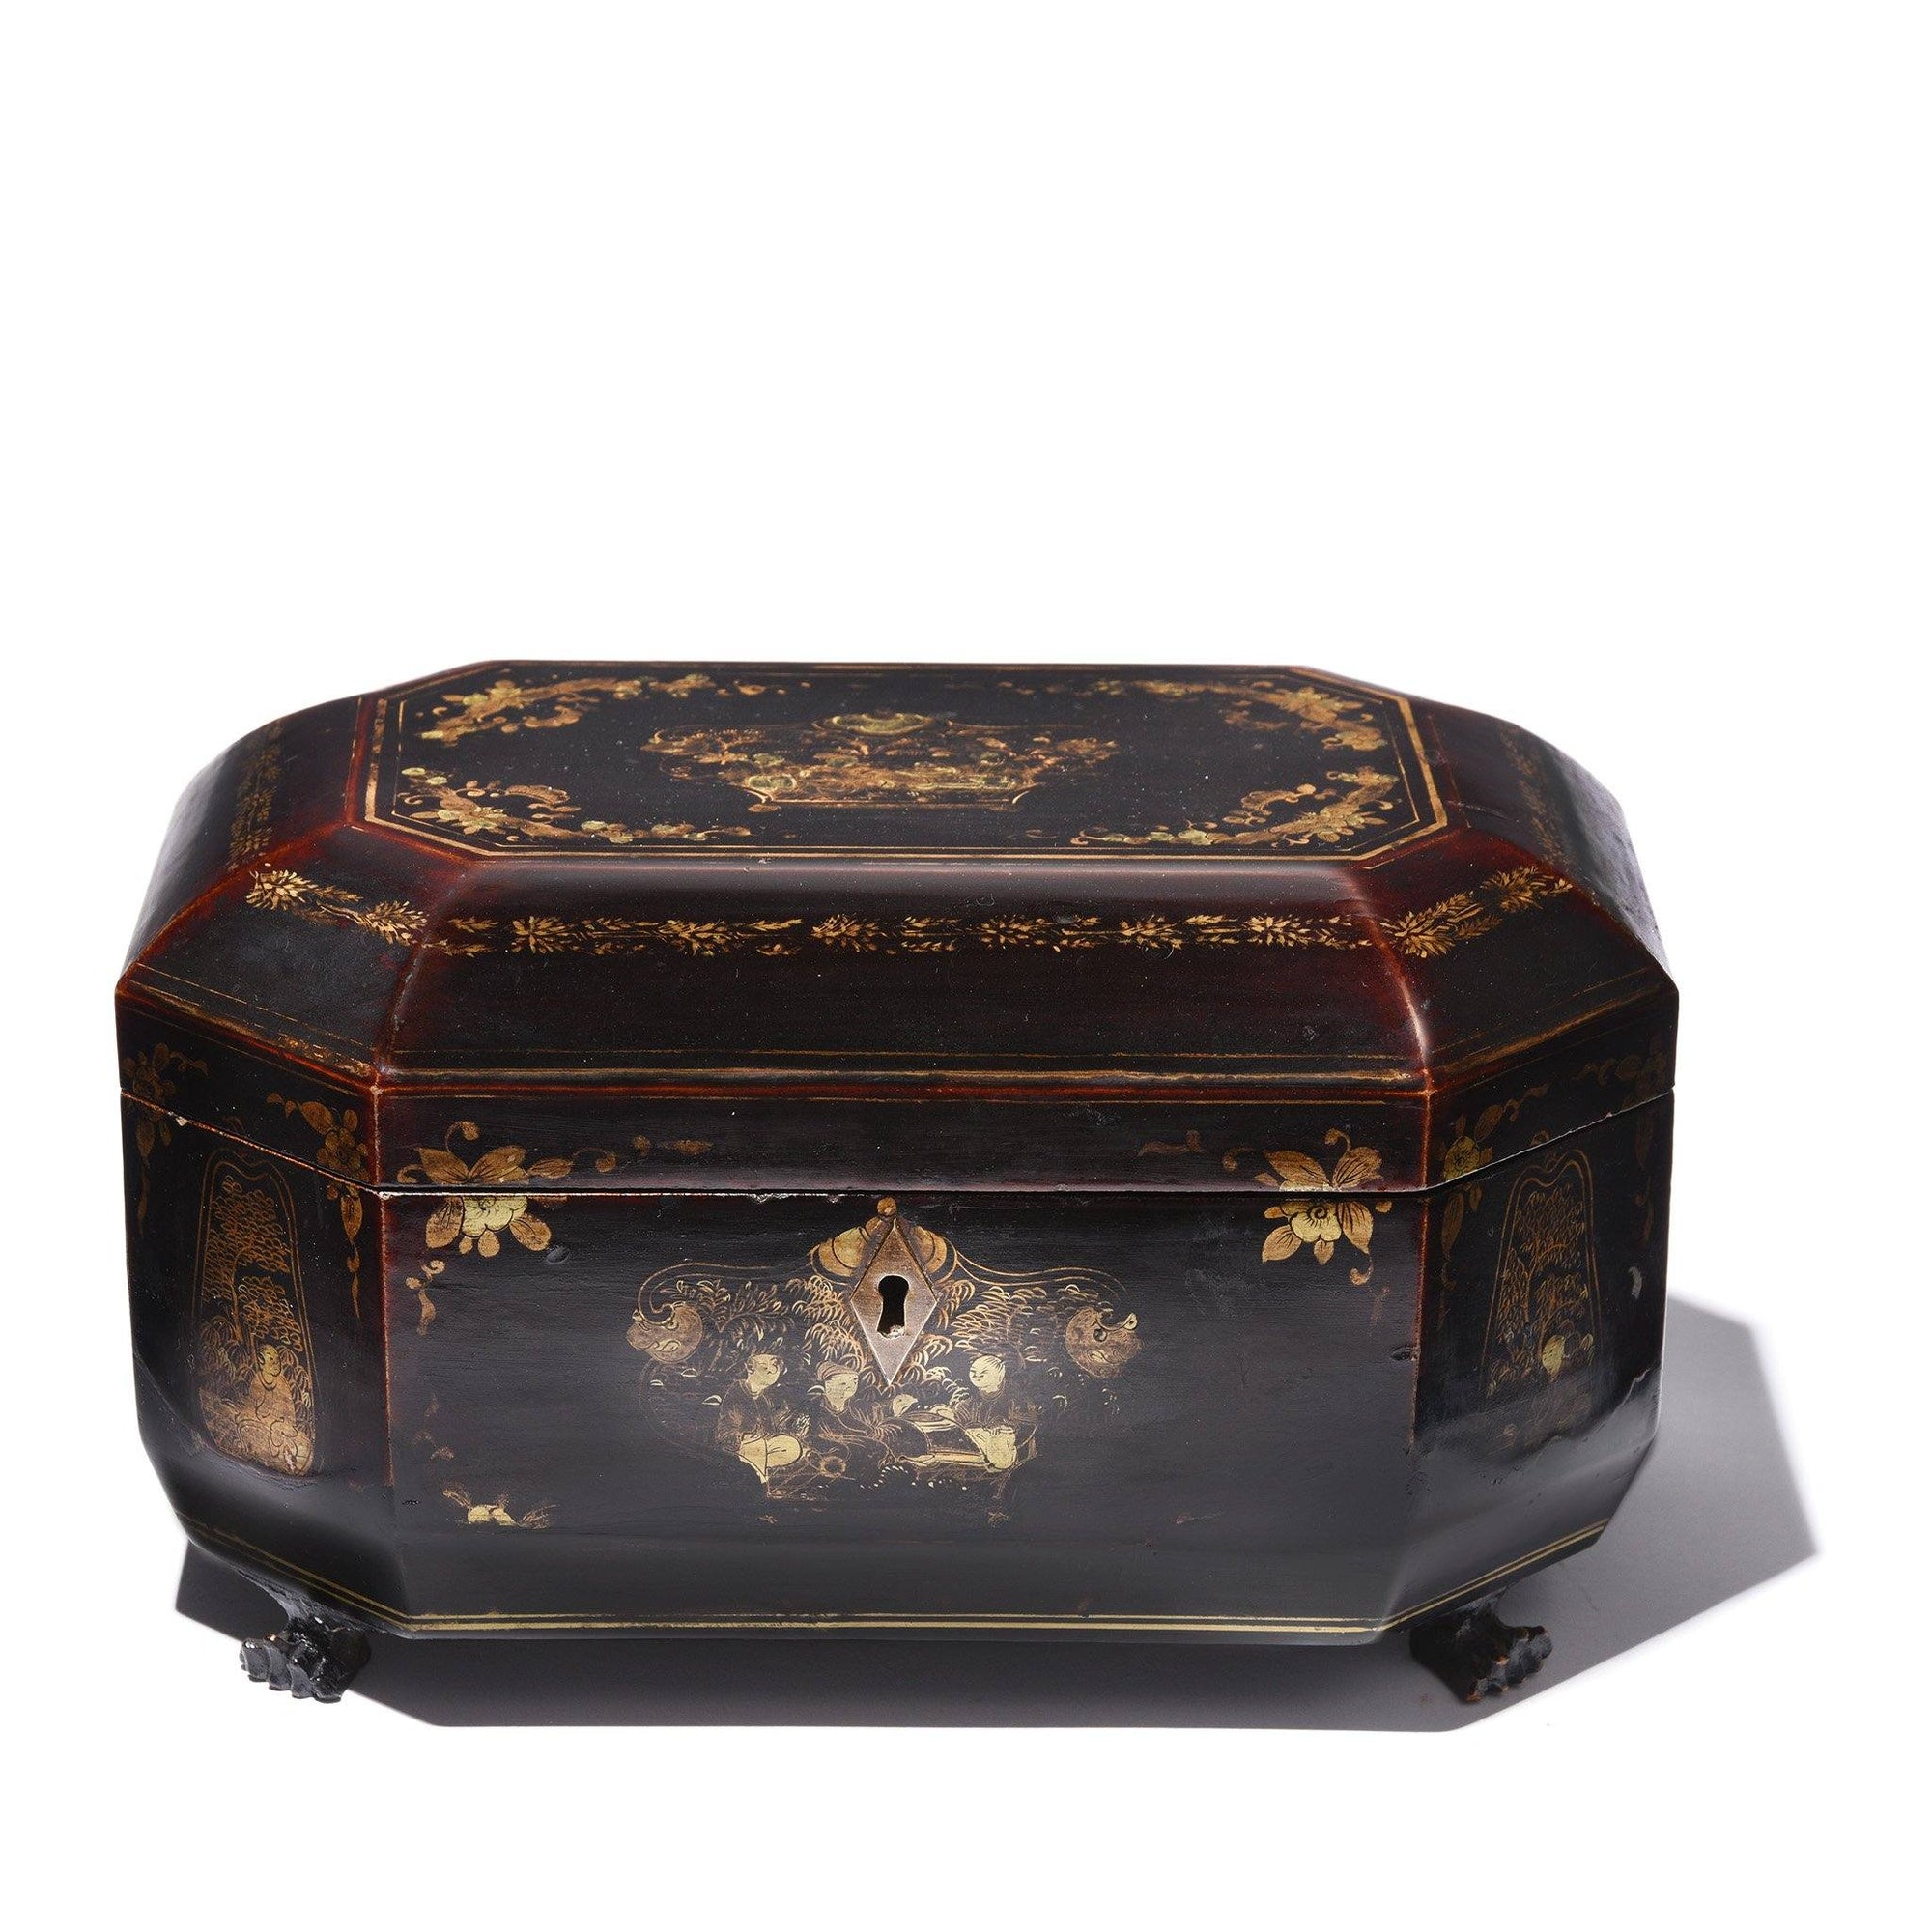 Black Lacquer Chinese Export Tea Caddy - Qing Dynasty, Early 19thC | Indigo Antiques